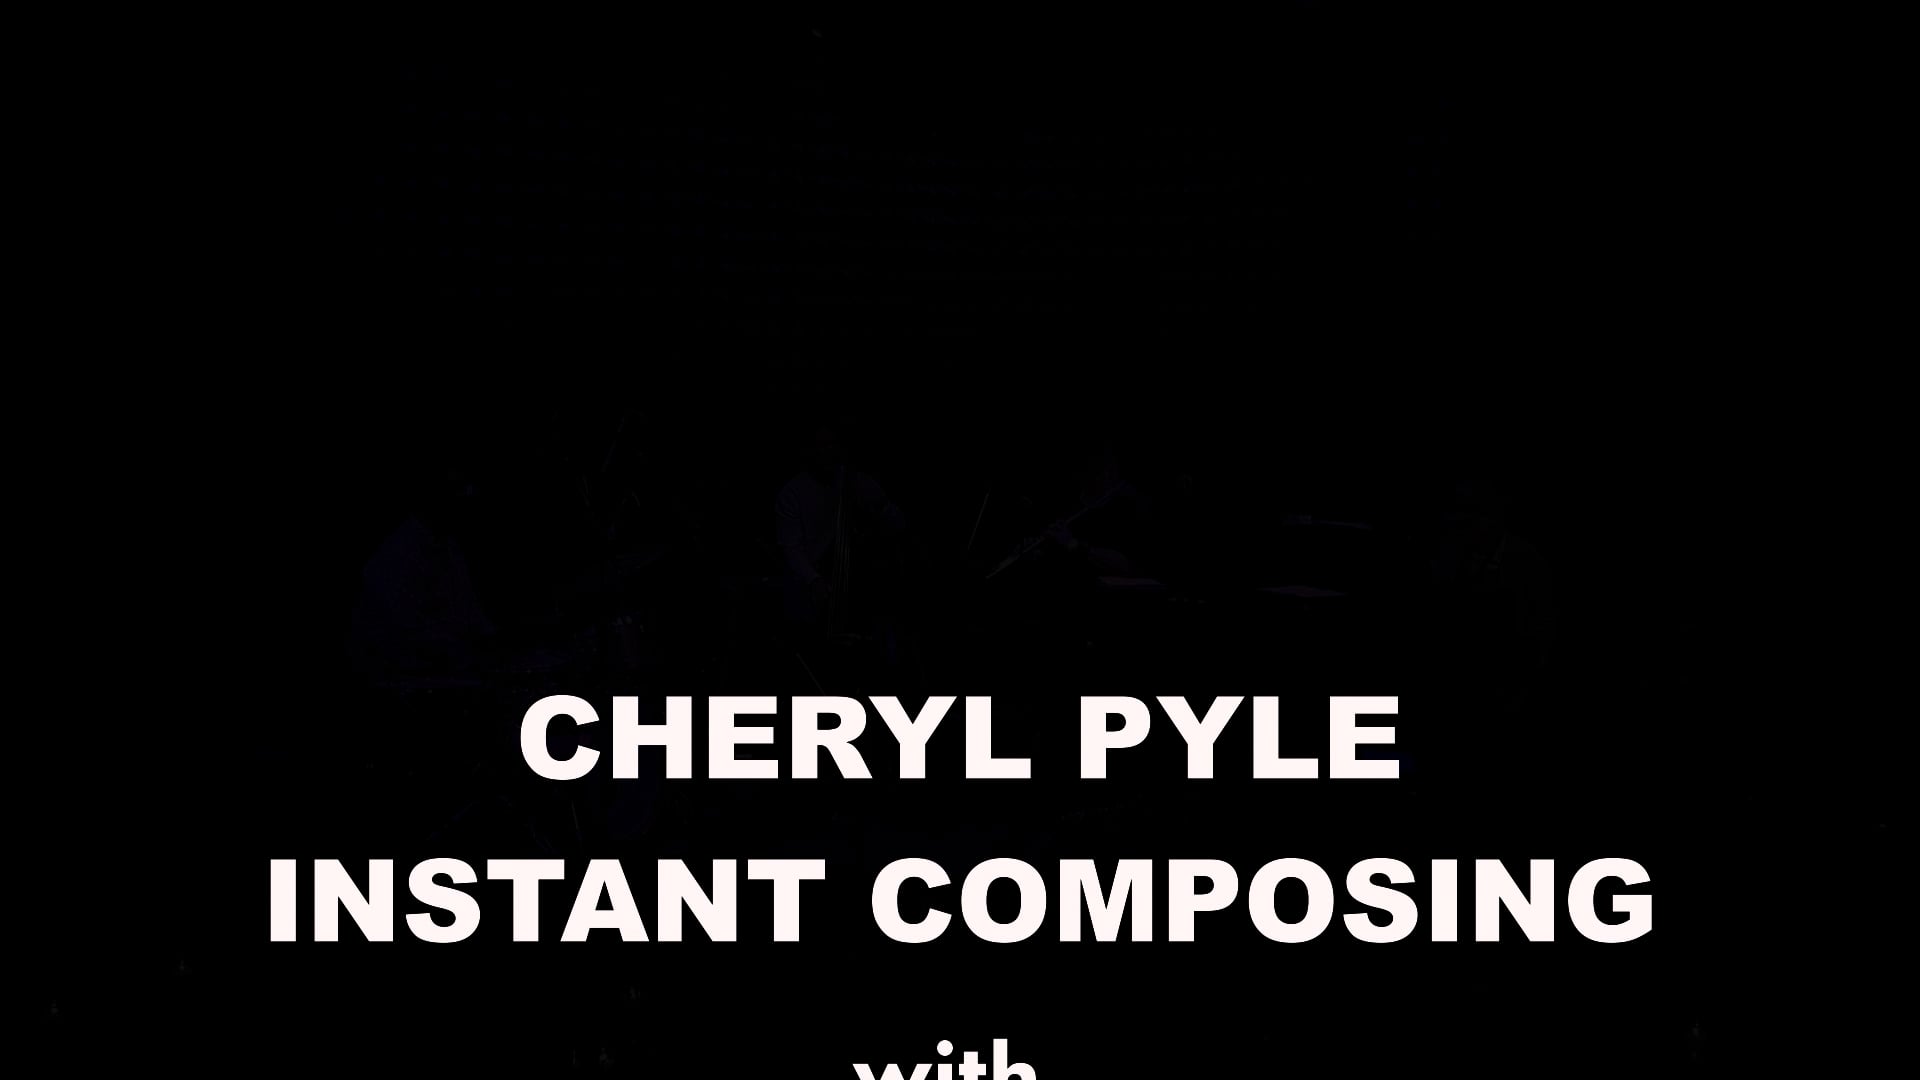 CHERYL PYLE Instant Composing with NY...